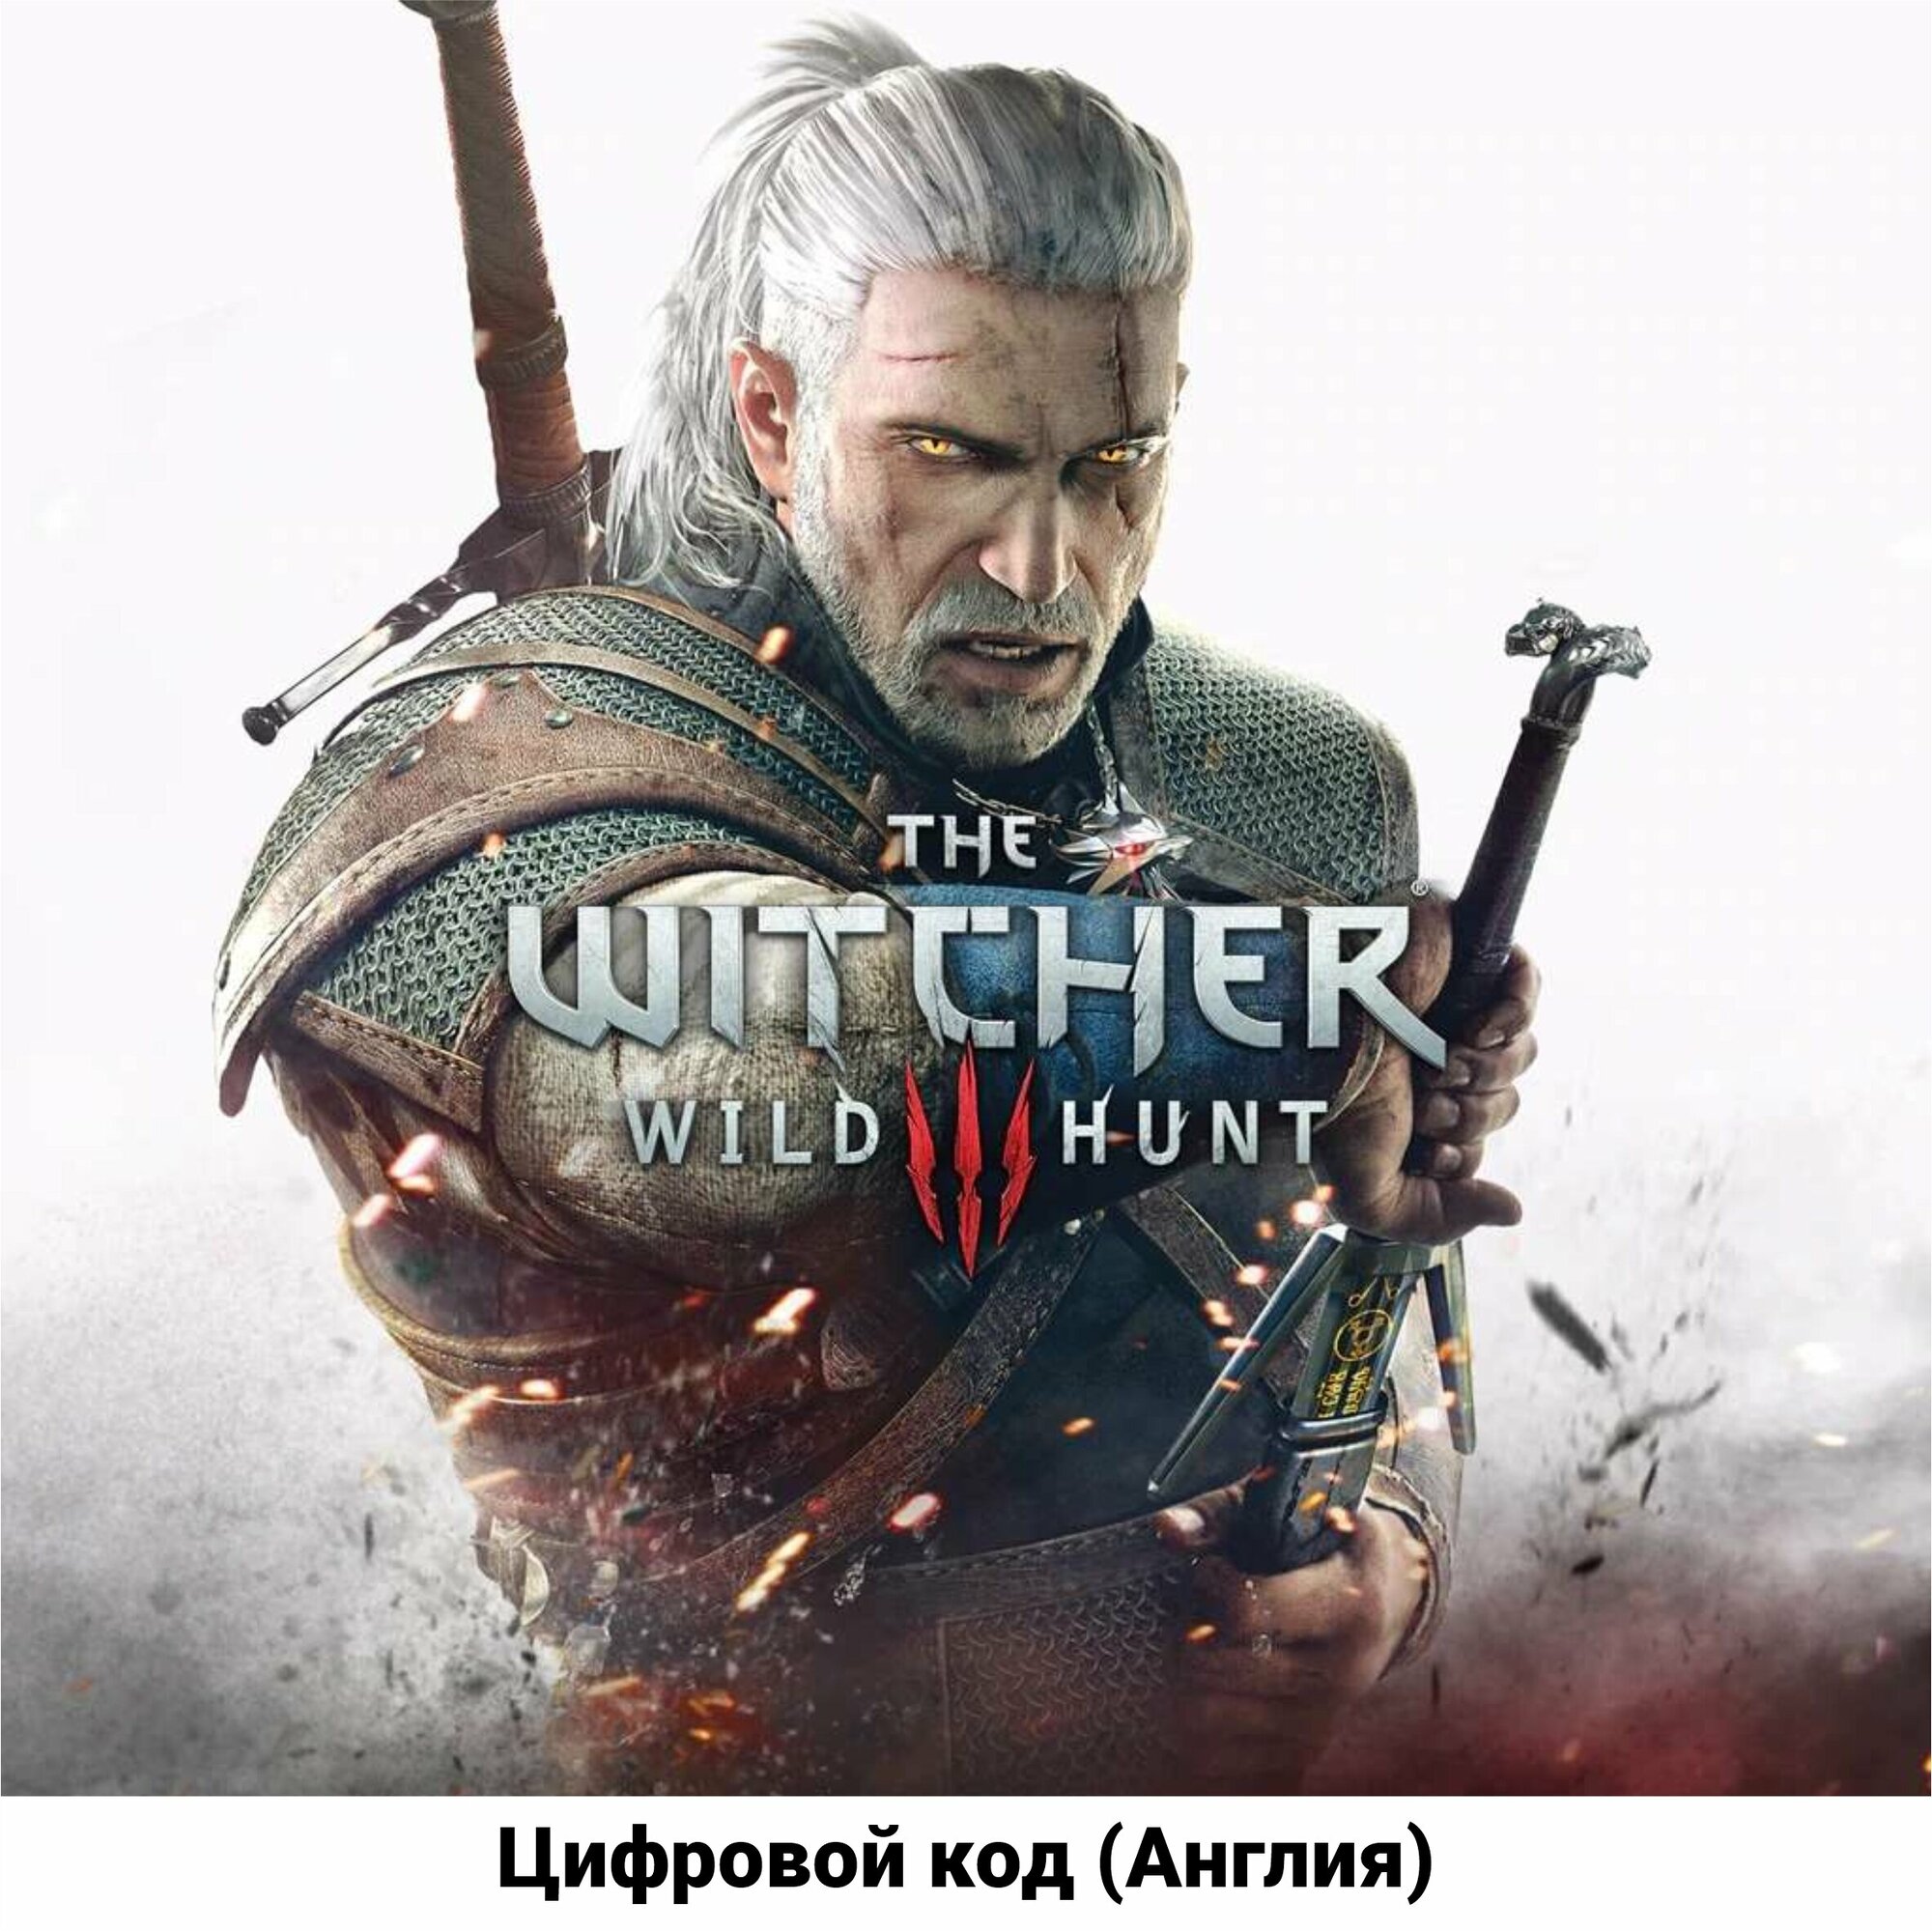 The Witcher 3 Wild Hunt Standard Edition на PS4/PS5 (русская озвучка) (Цифровой код, Англия)